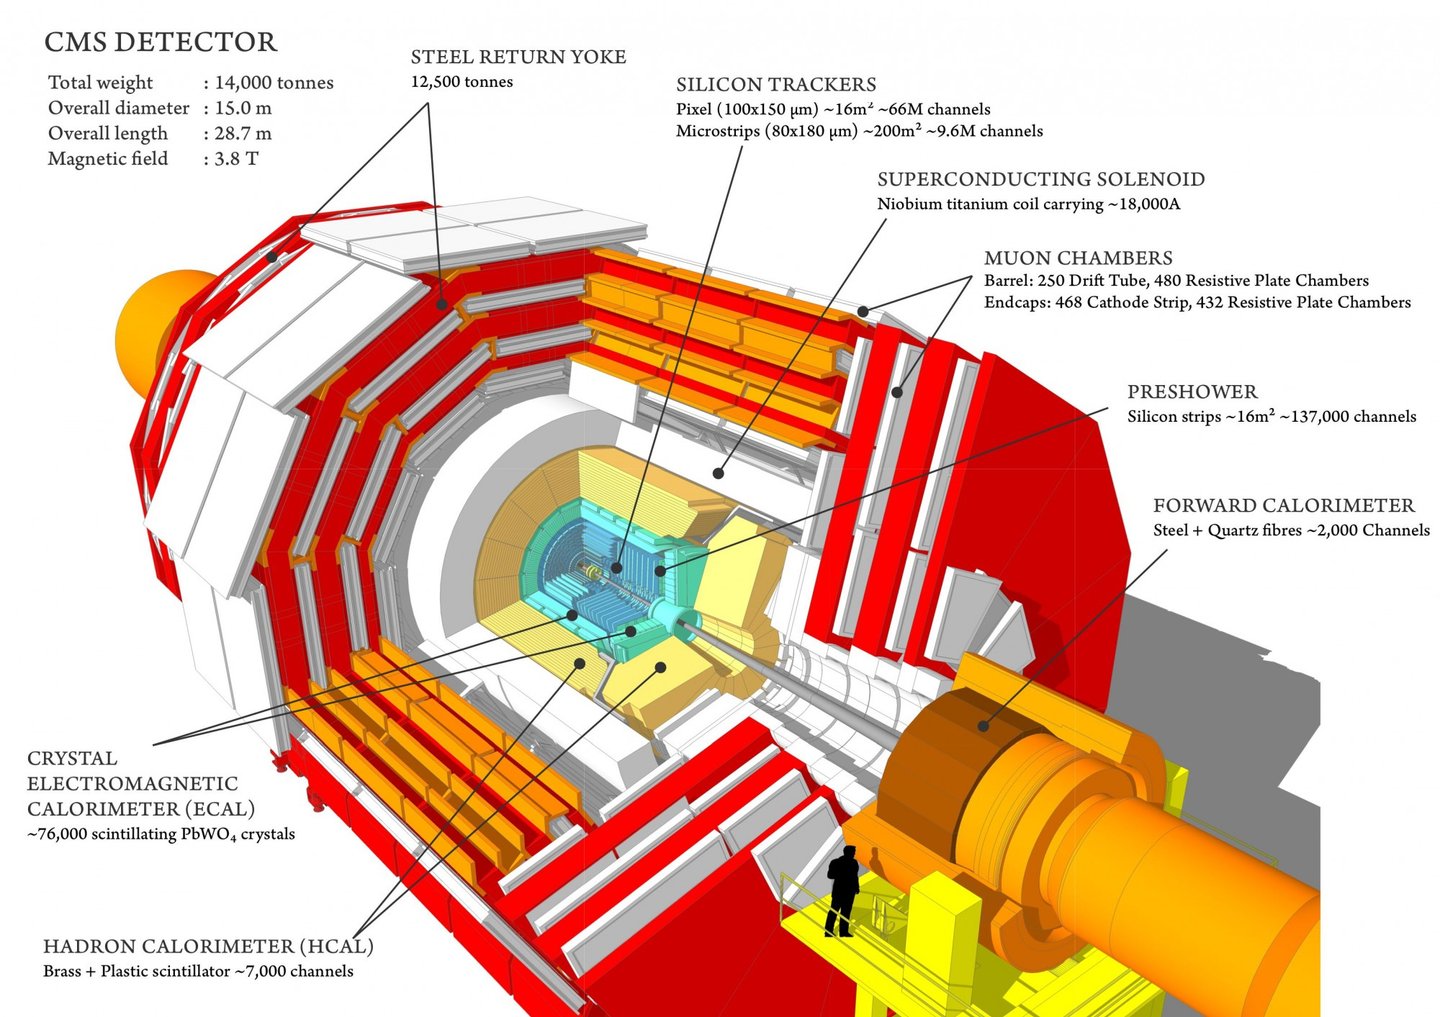 Sectional view of the CMS detector. The LHC beams travel in opposite directions along the central axis of the CMS cylinder colliding in the middle of the CMS detector.